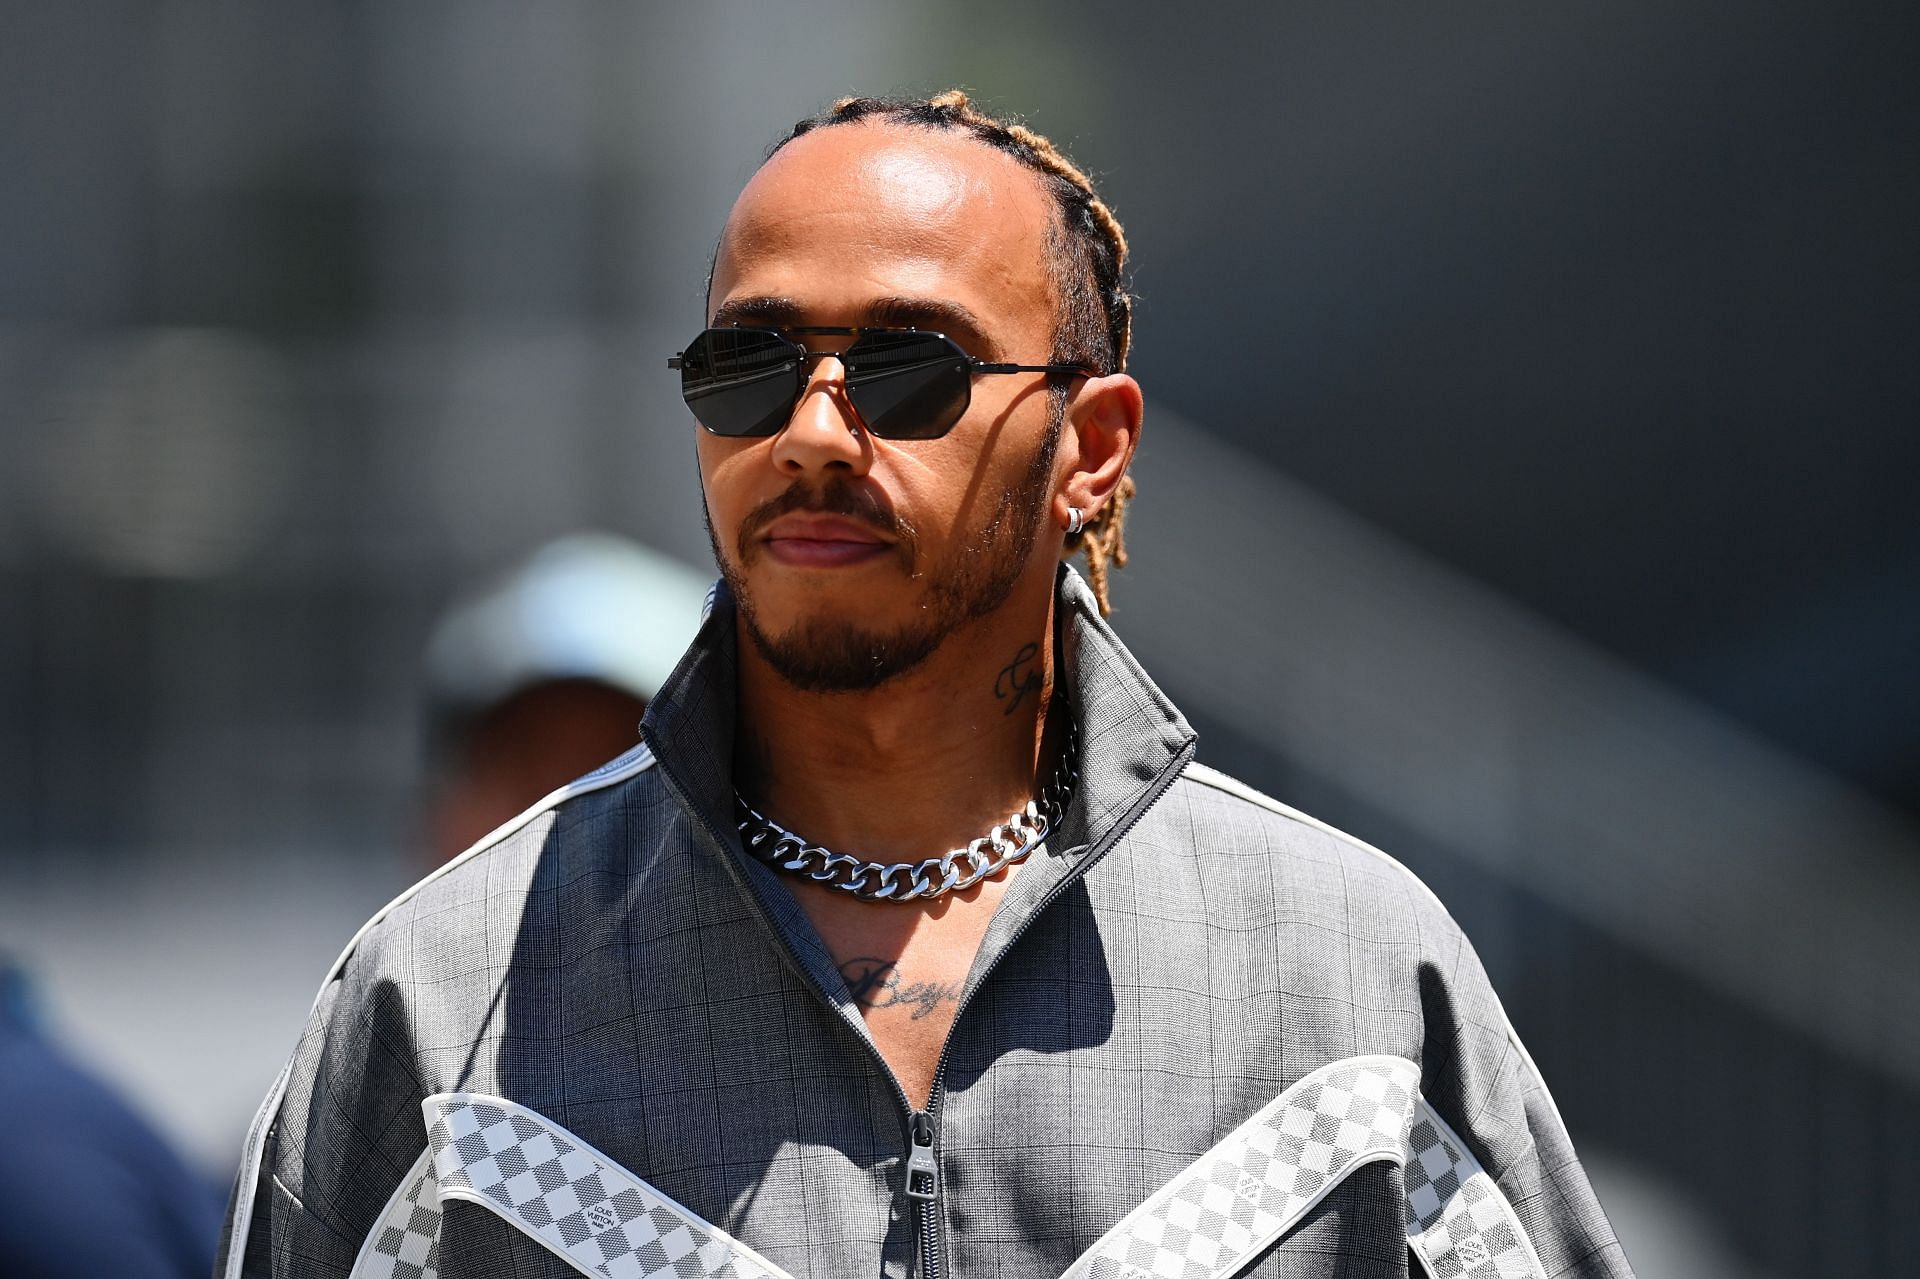 Mercedes driver Lewis Hamilton walks in the paddock during the 2022 F1 Azerbaijan GP weekend. (Photo by Dan Mullan/Getty Images)